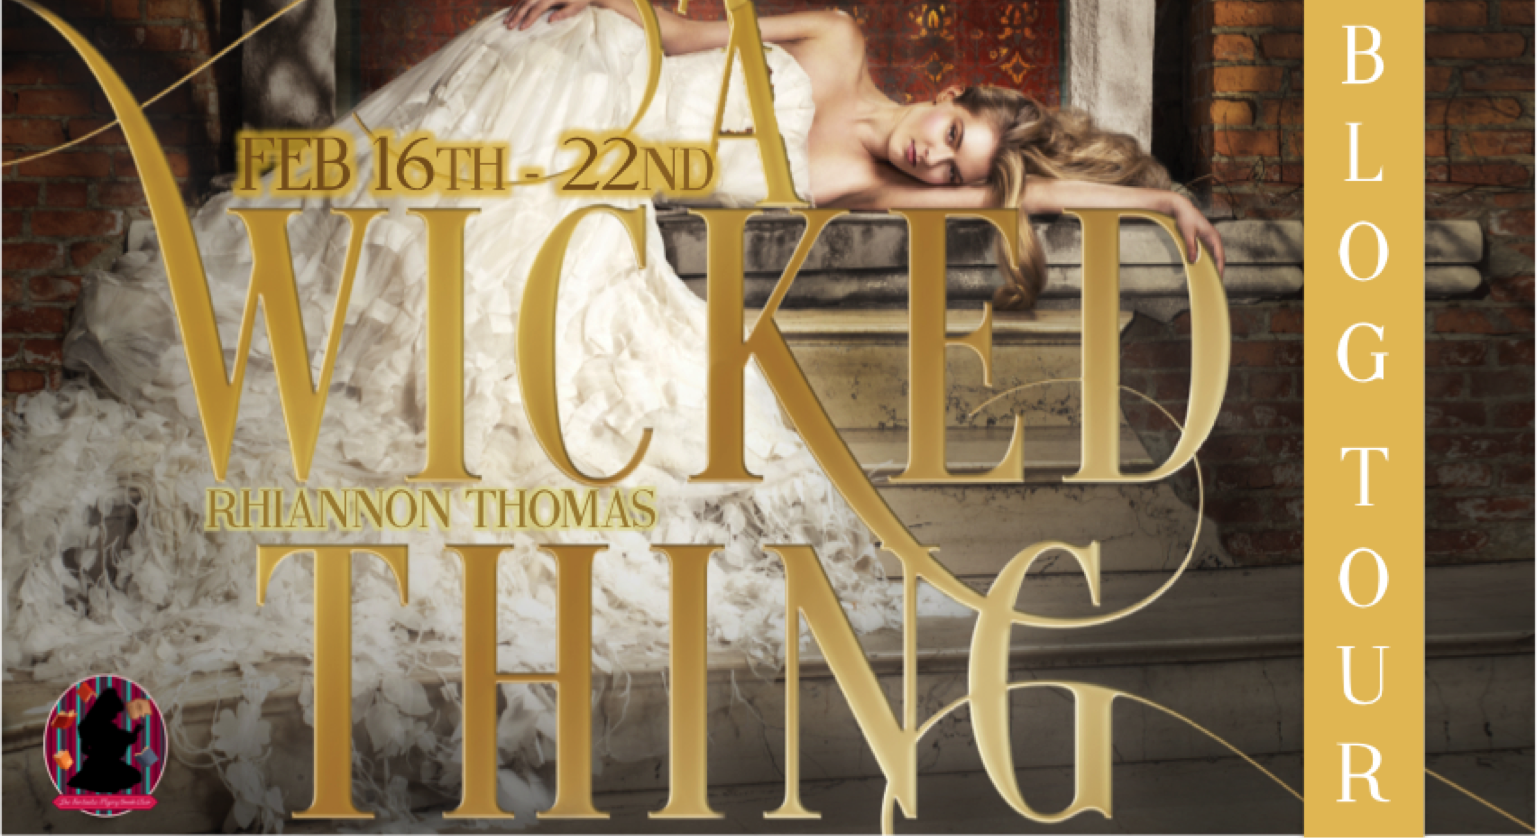 http://theunofficialaddictionbookfanclub.blogspot.com/2014/12/ffbc-blog-tour-wicked-thing-by-rhiannon.html